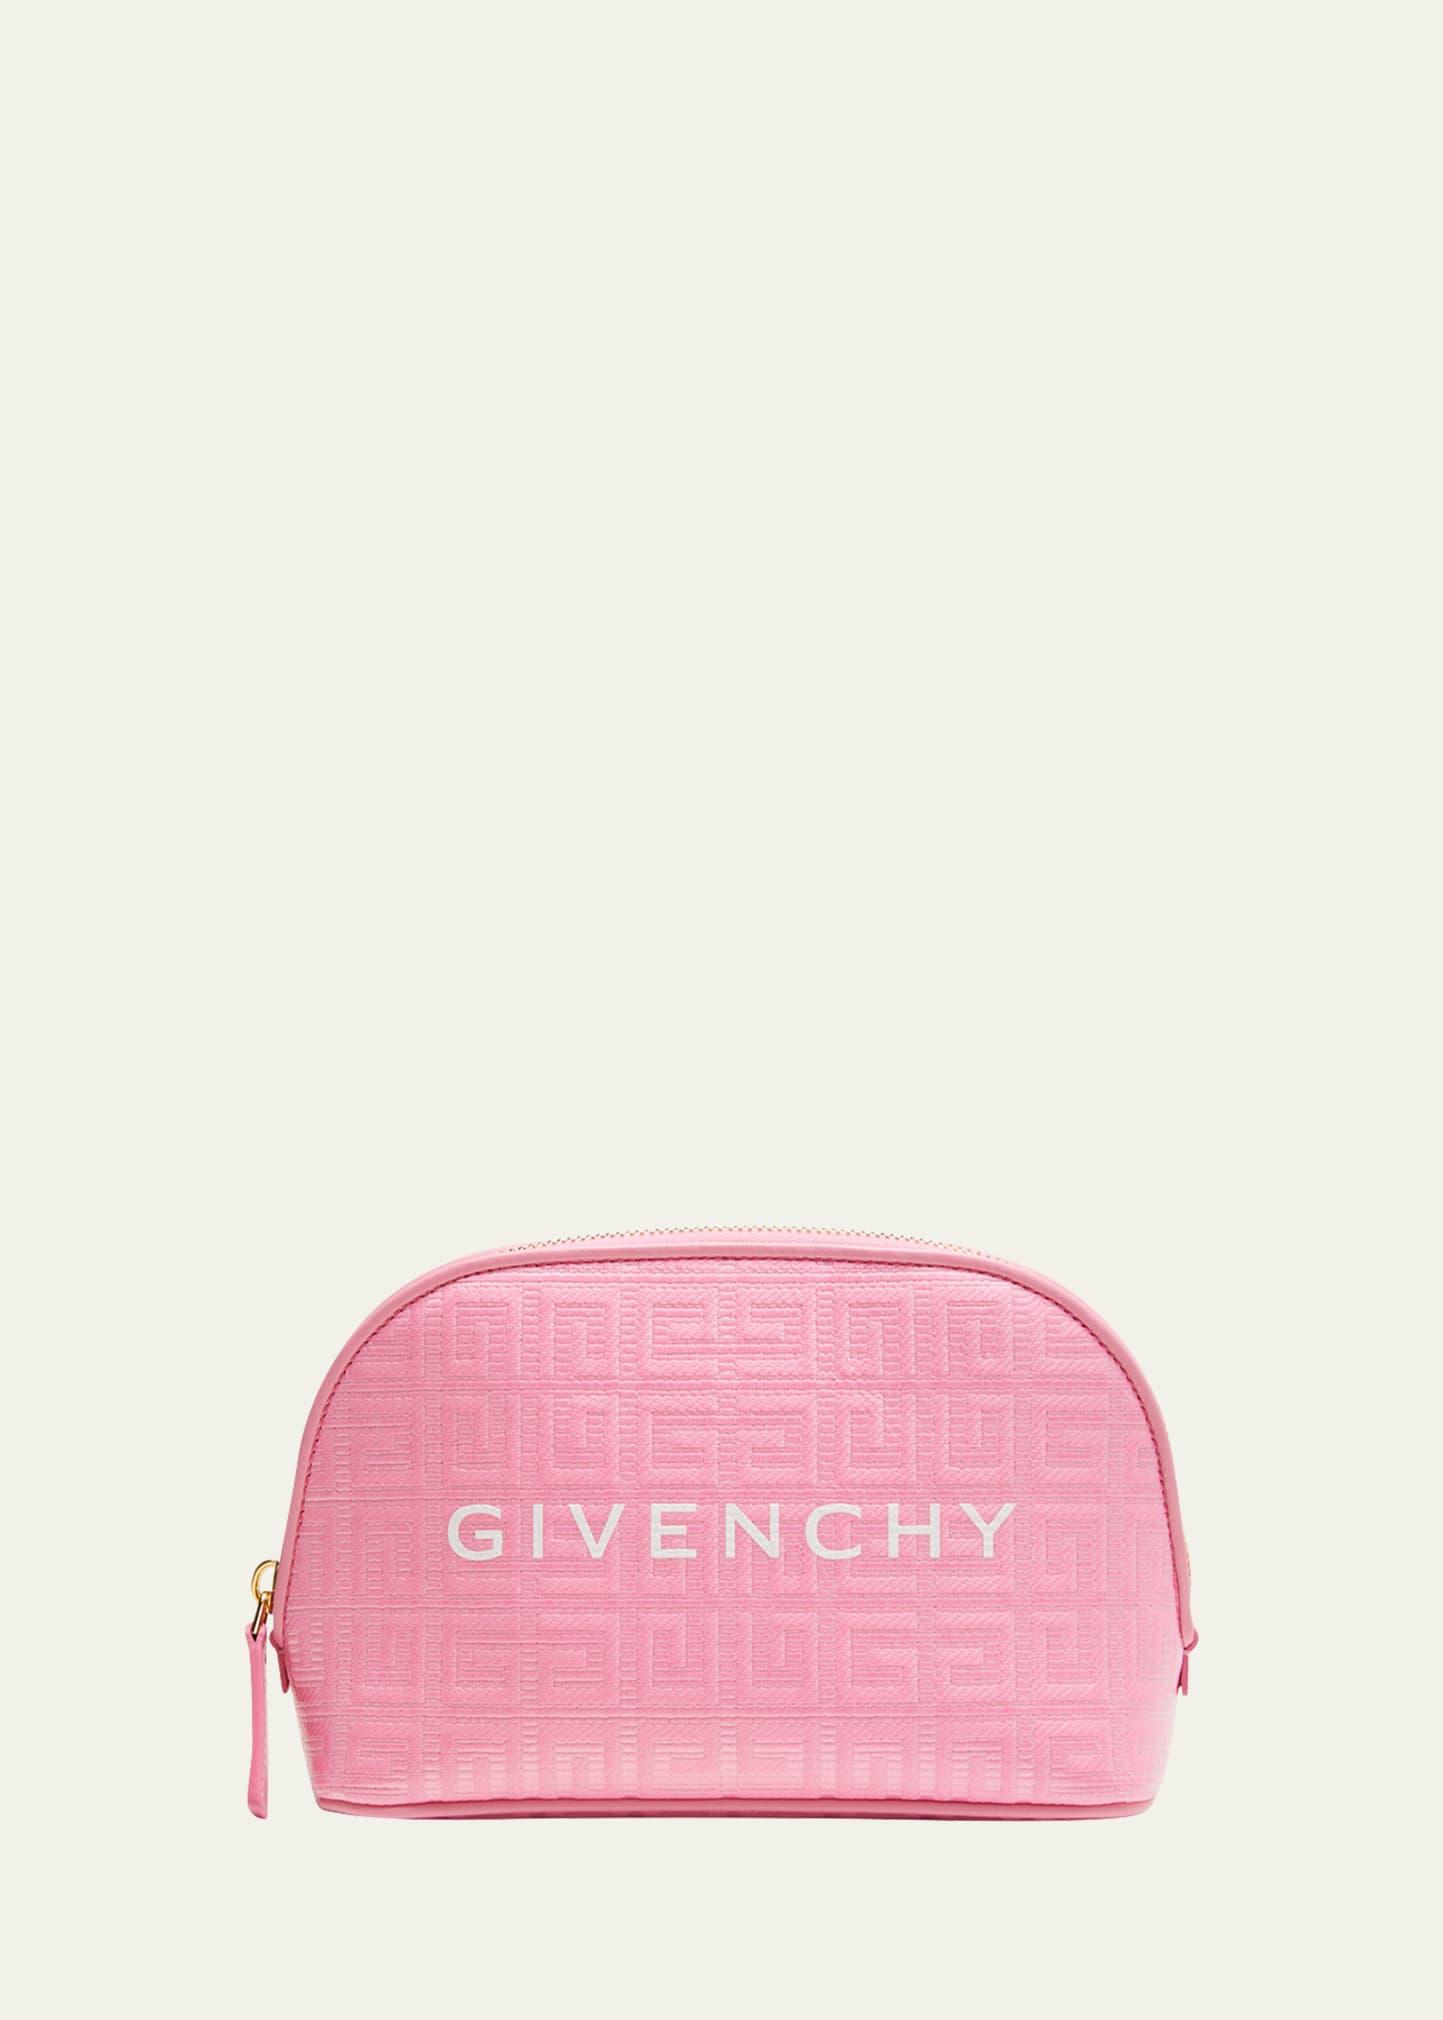 GIVENCHY ポーチ ピンク - バッグ